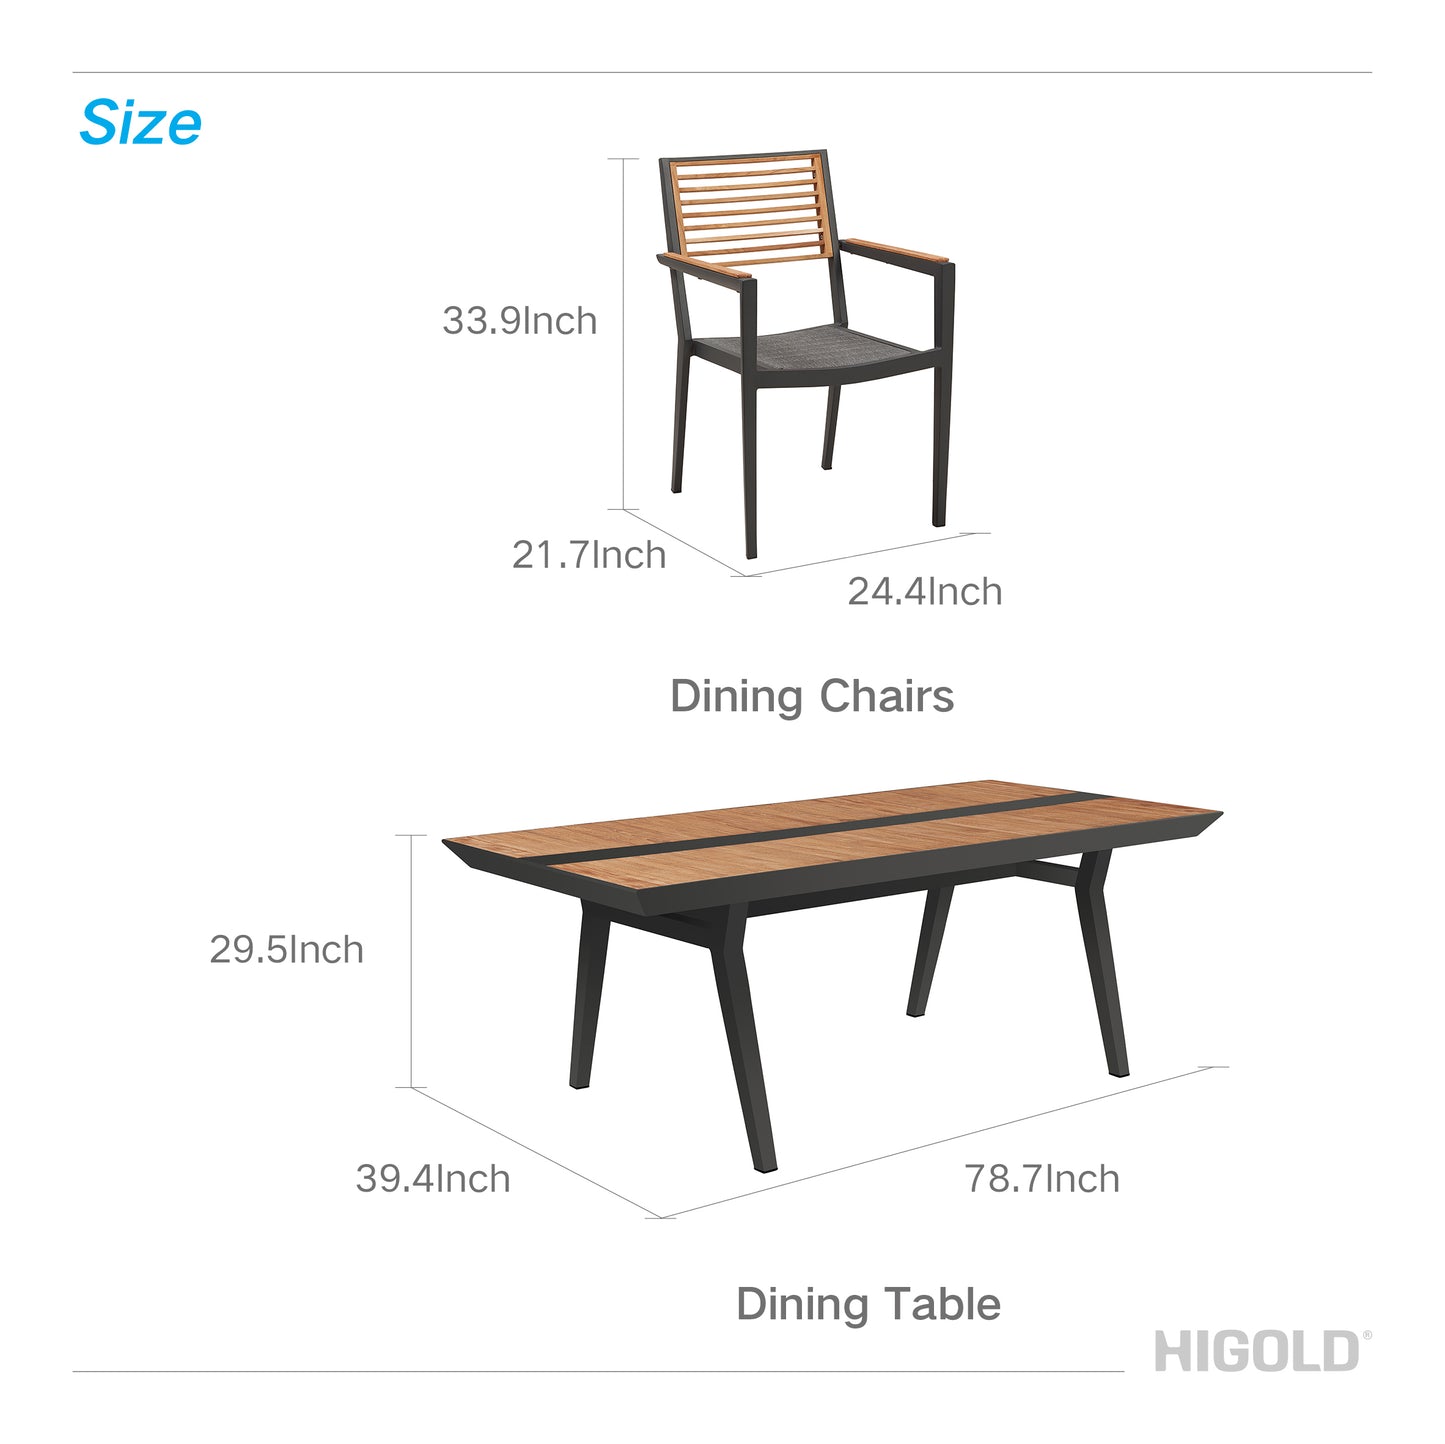 Champion Patio Dining Set, 7 Pieces Outdoor Dining Chairs with Teak Solid Wood Tabletop, Matte Charcoal Aluminum Frame